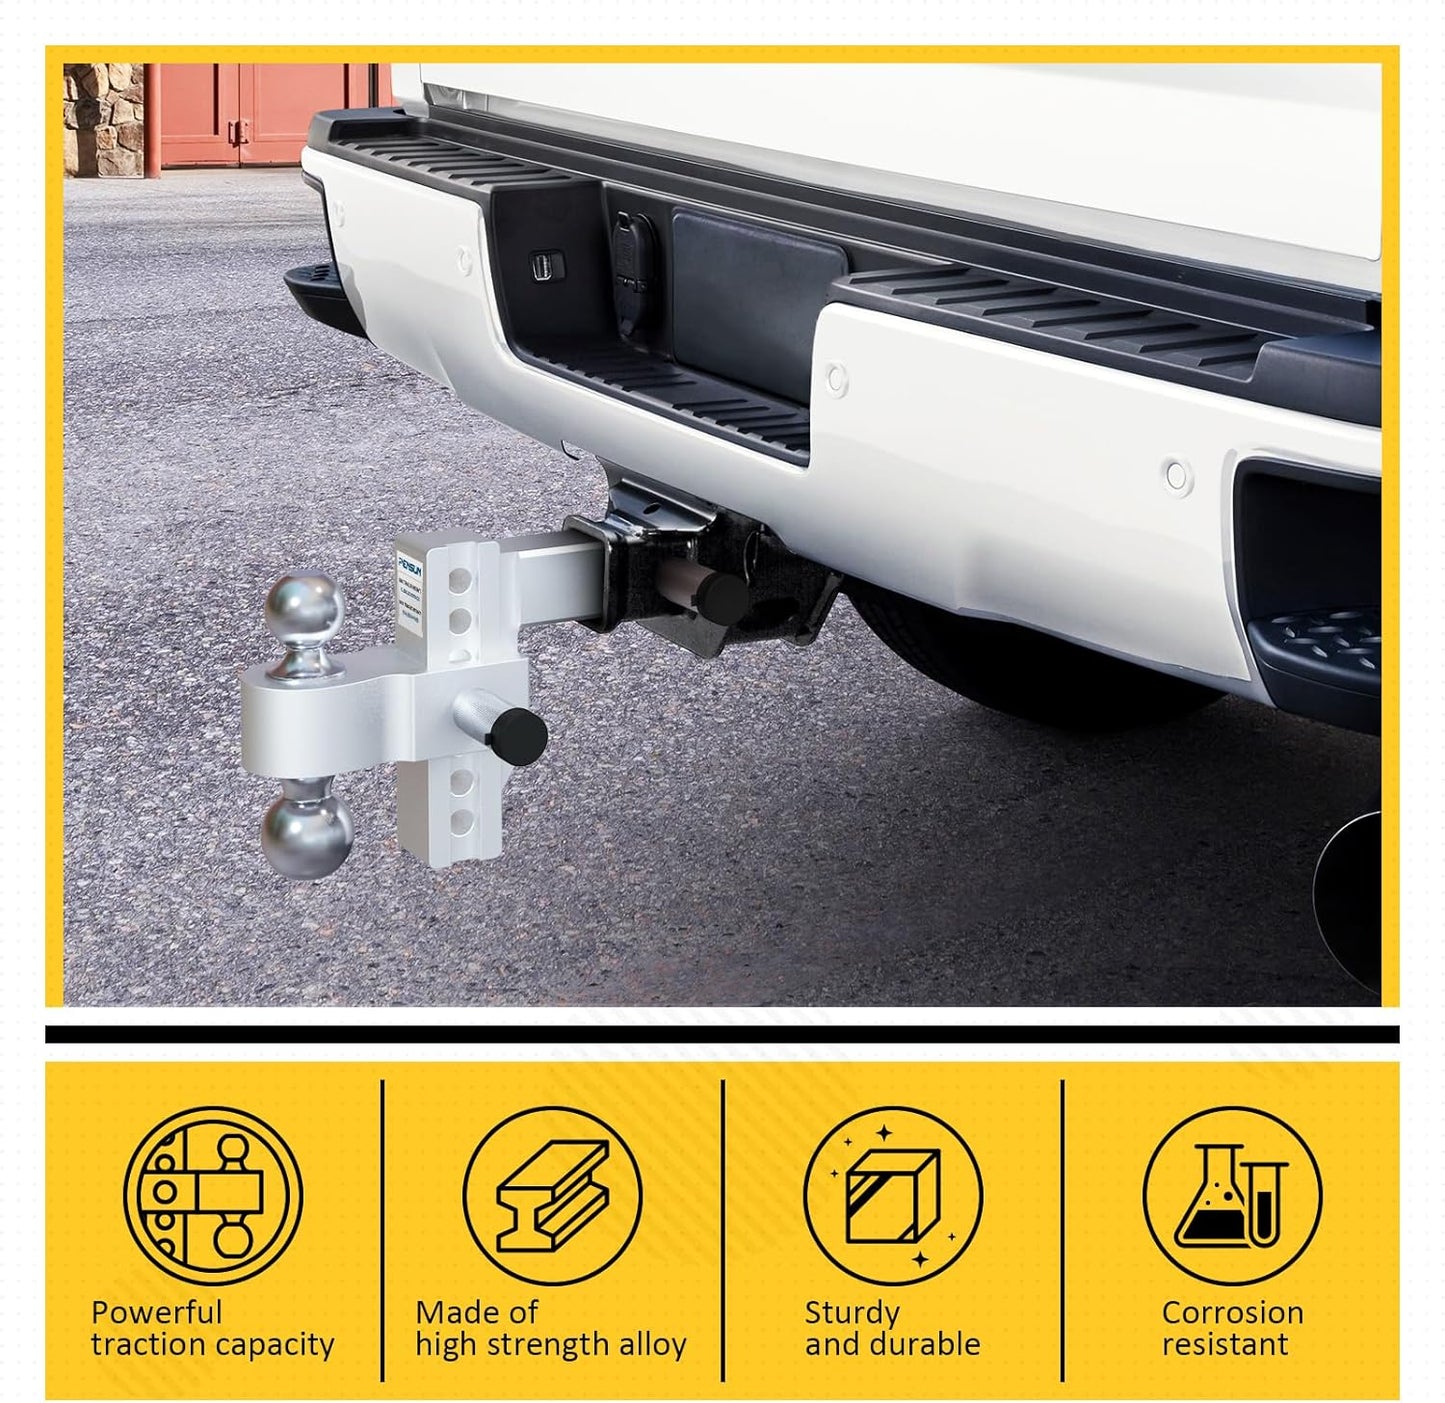 PENSUN Adjustable Trailer Hitch - 6" Drop/Rise Aluminum Drop Hitch with 2'' & 2-5/16'' Solid Dual Balls Mount Fit for 2" Receiver 12500 lbs Heavy Duty Tow Hitch with Double Anti-Theft Pins Locks